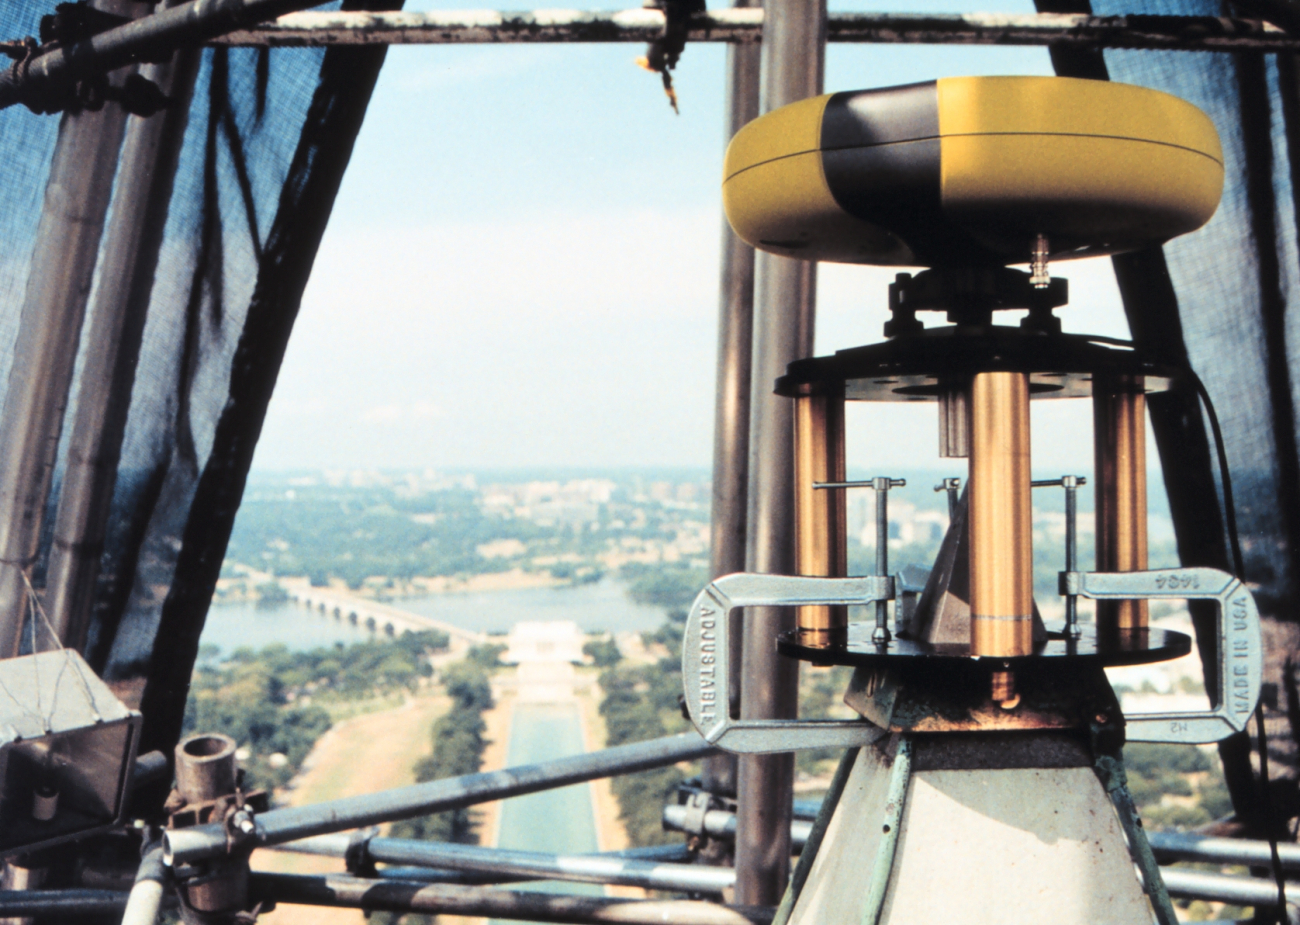 A Javad Positioning System antenna atop the Washington Monument